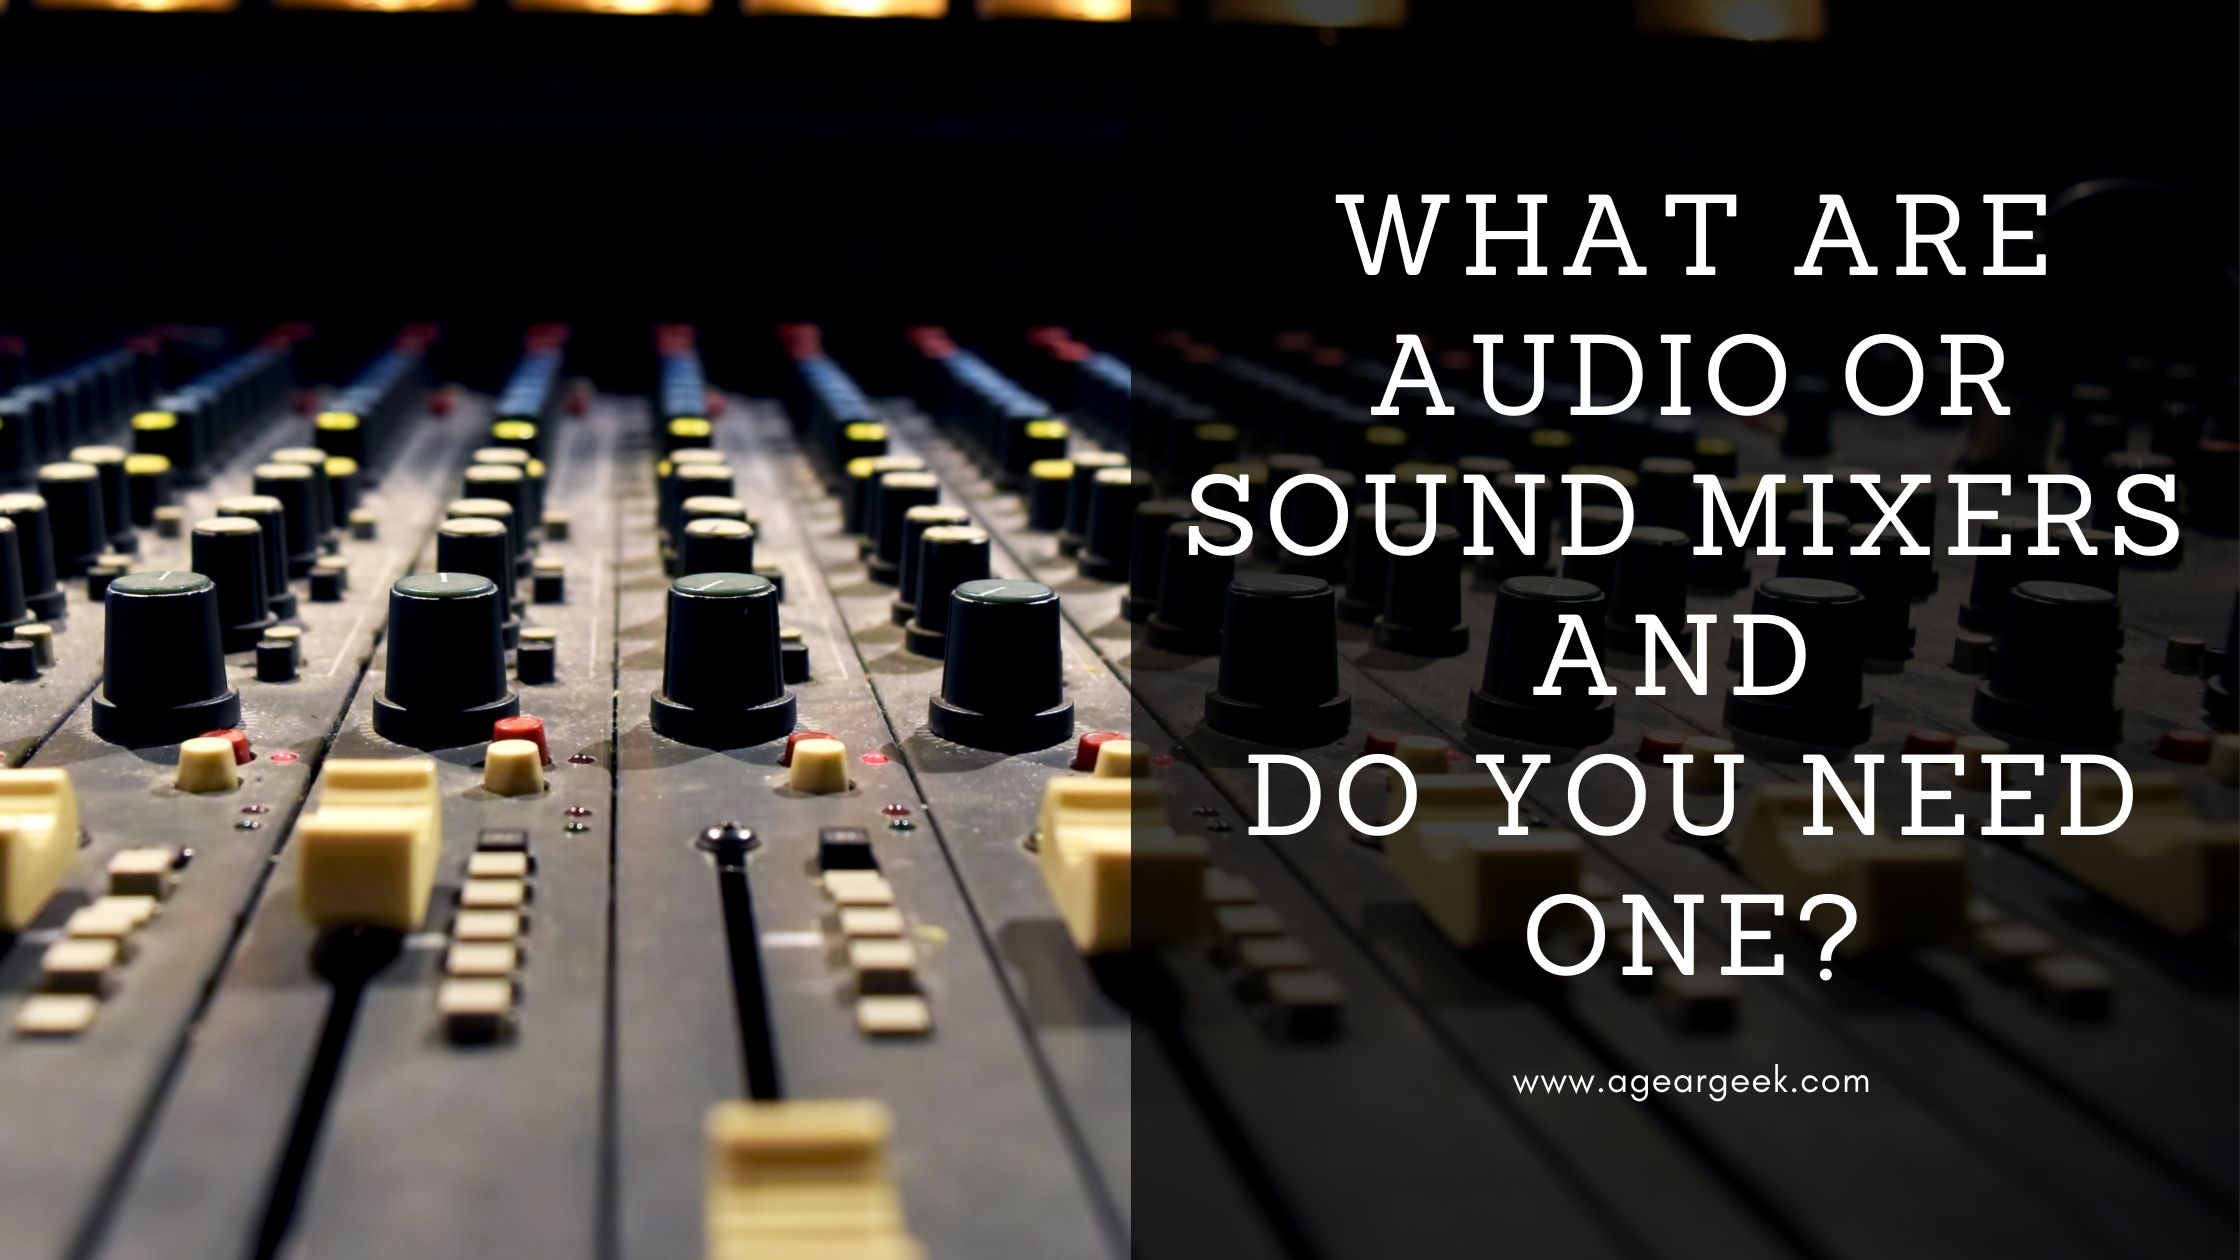 You are currently viewing What are Audio or Sound Mixers and do you need one?